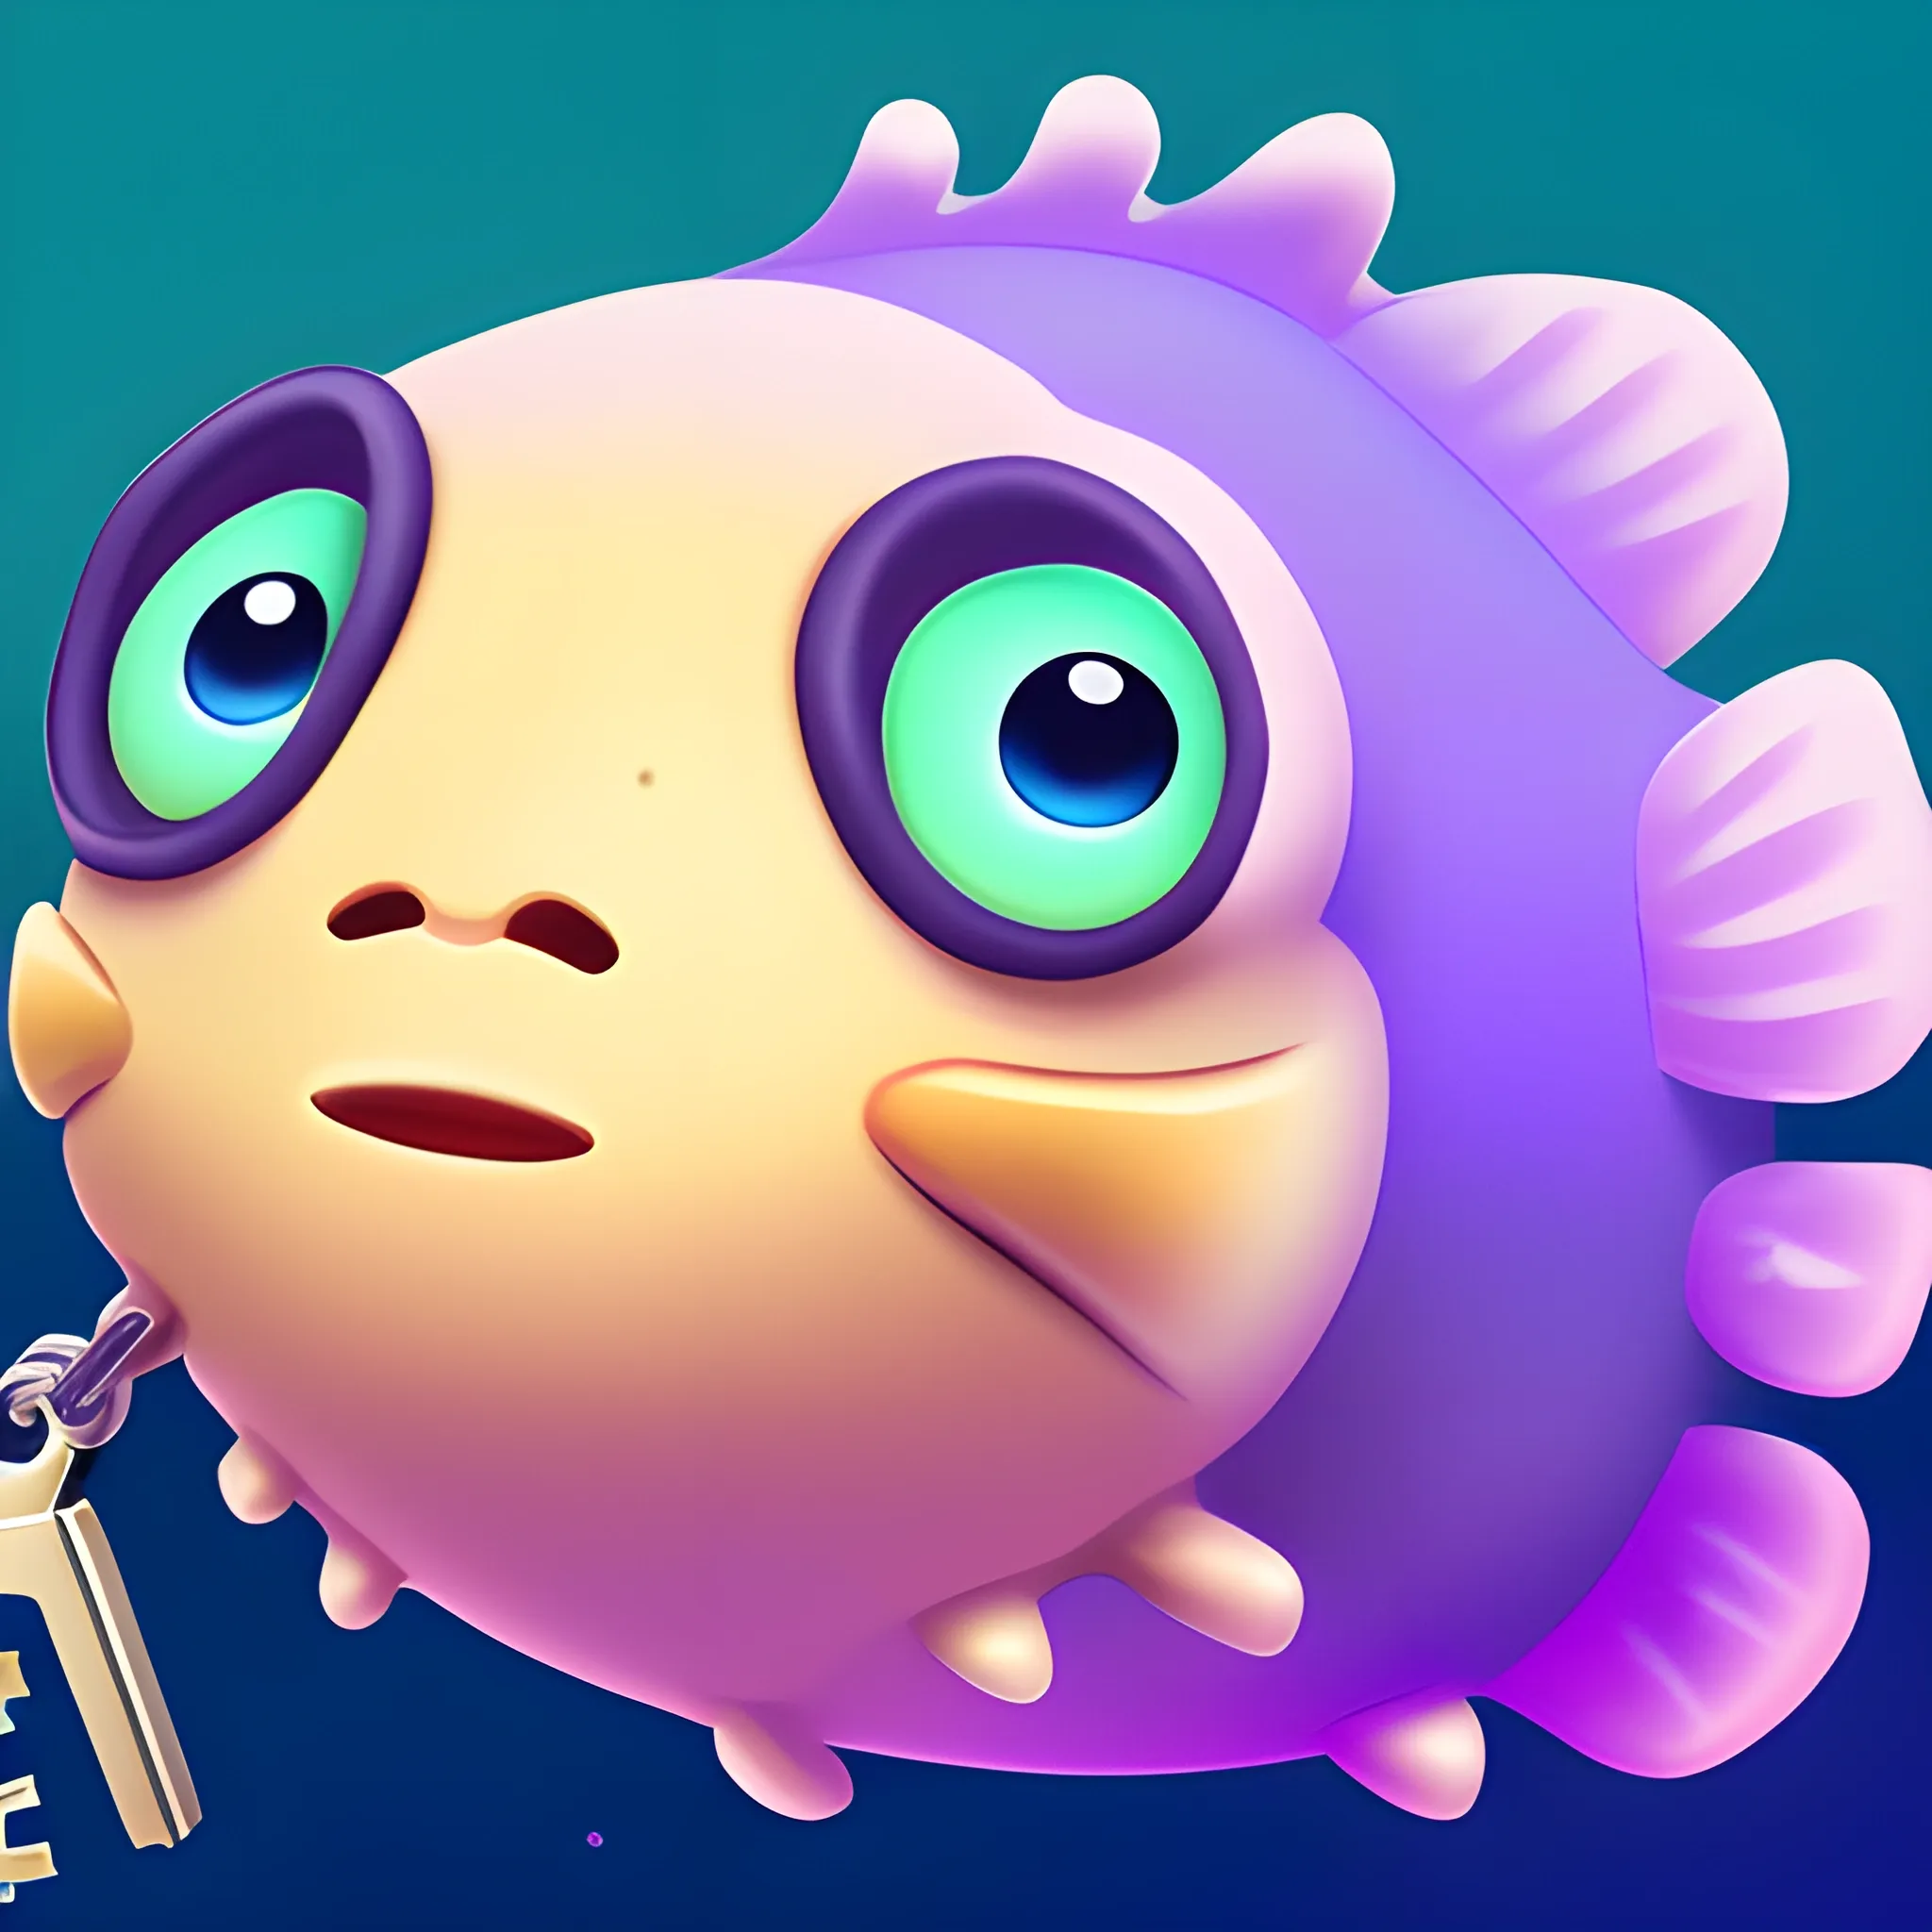 A purple cute puffer fish holding a key in one hand and two ethereum coins in the other